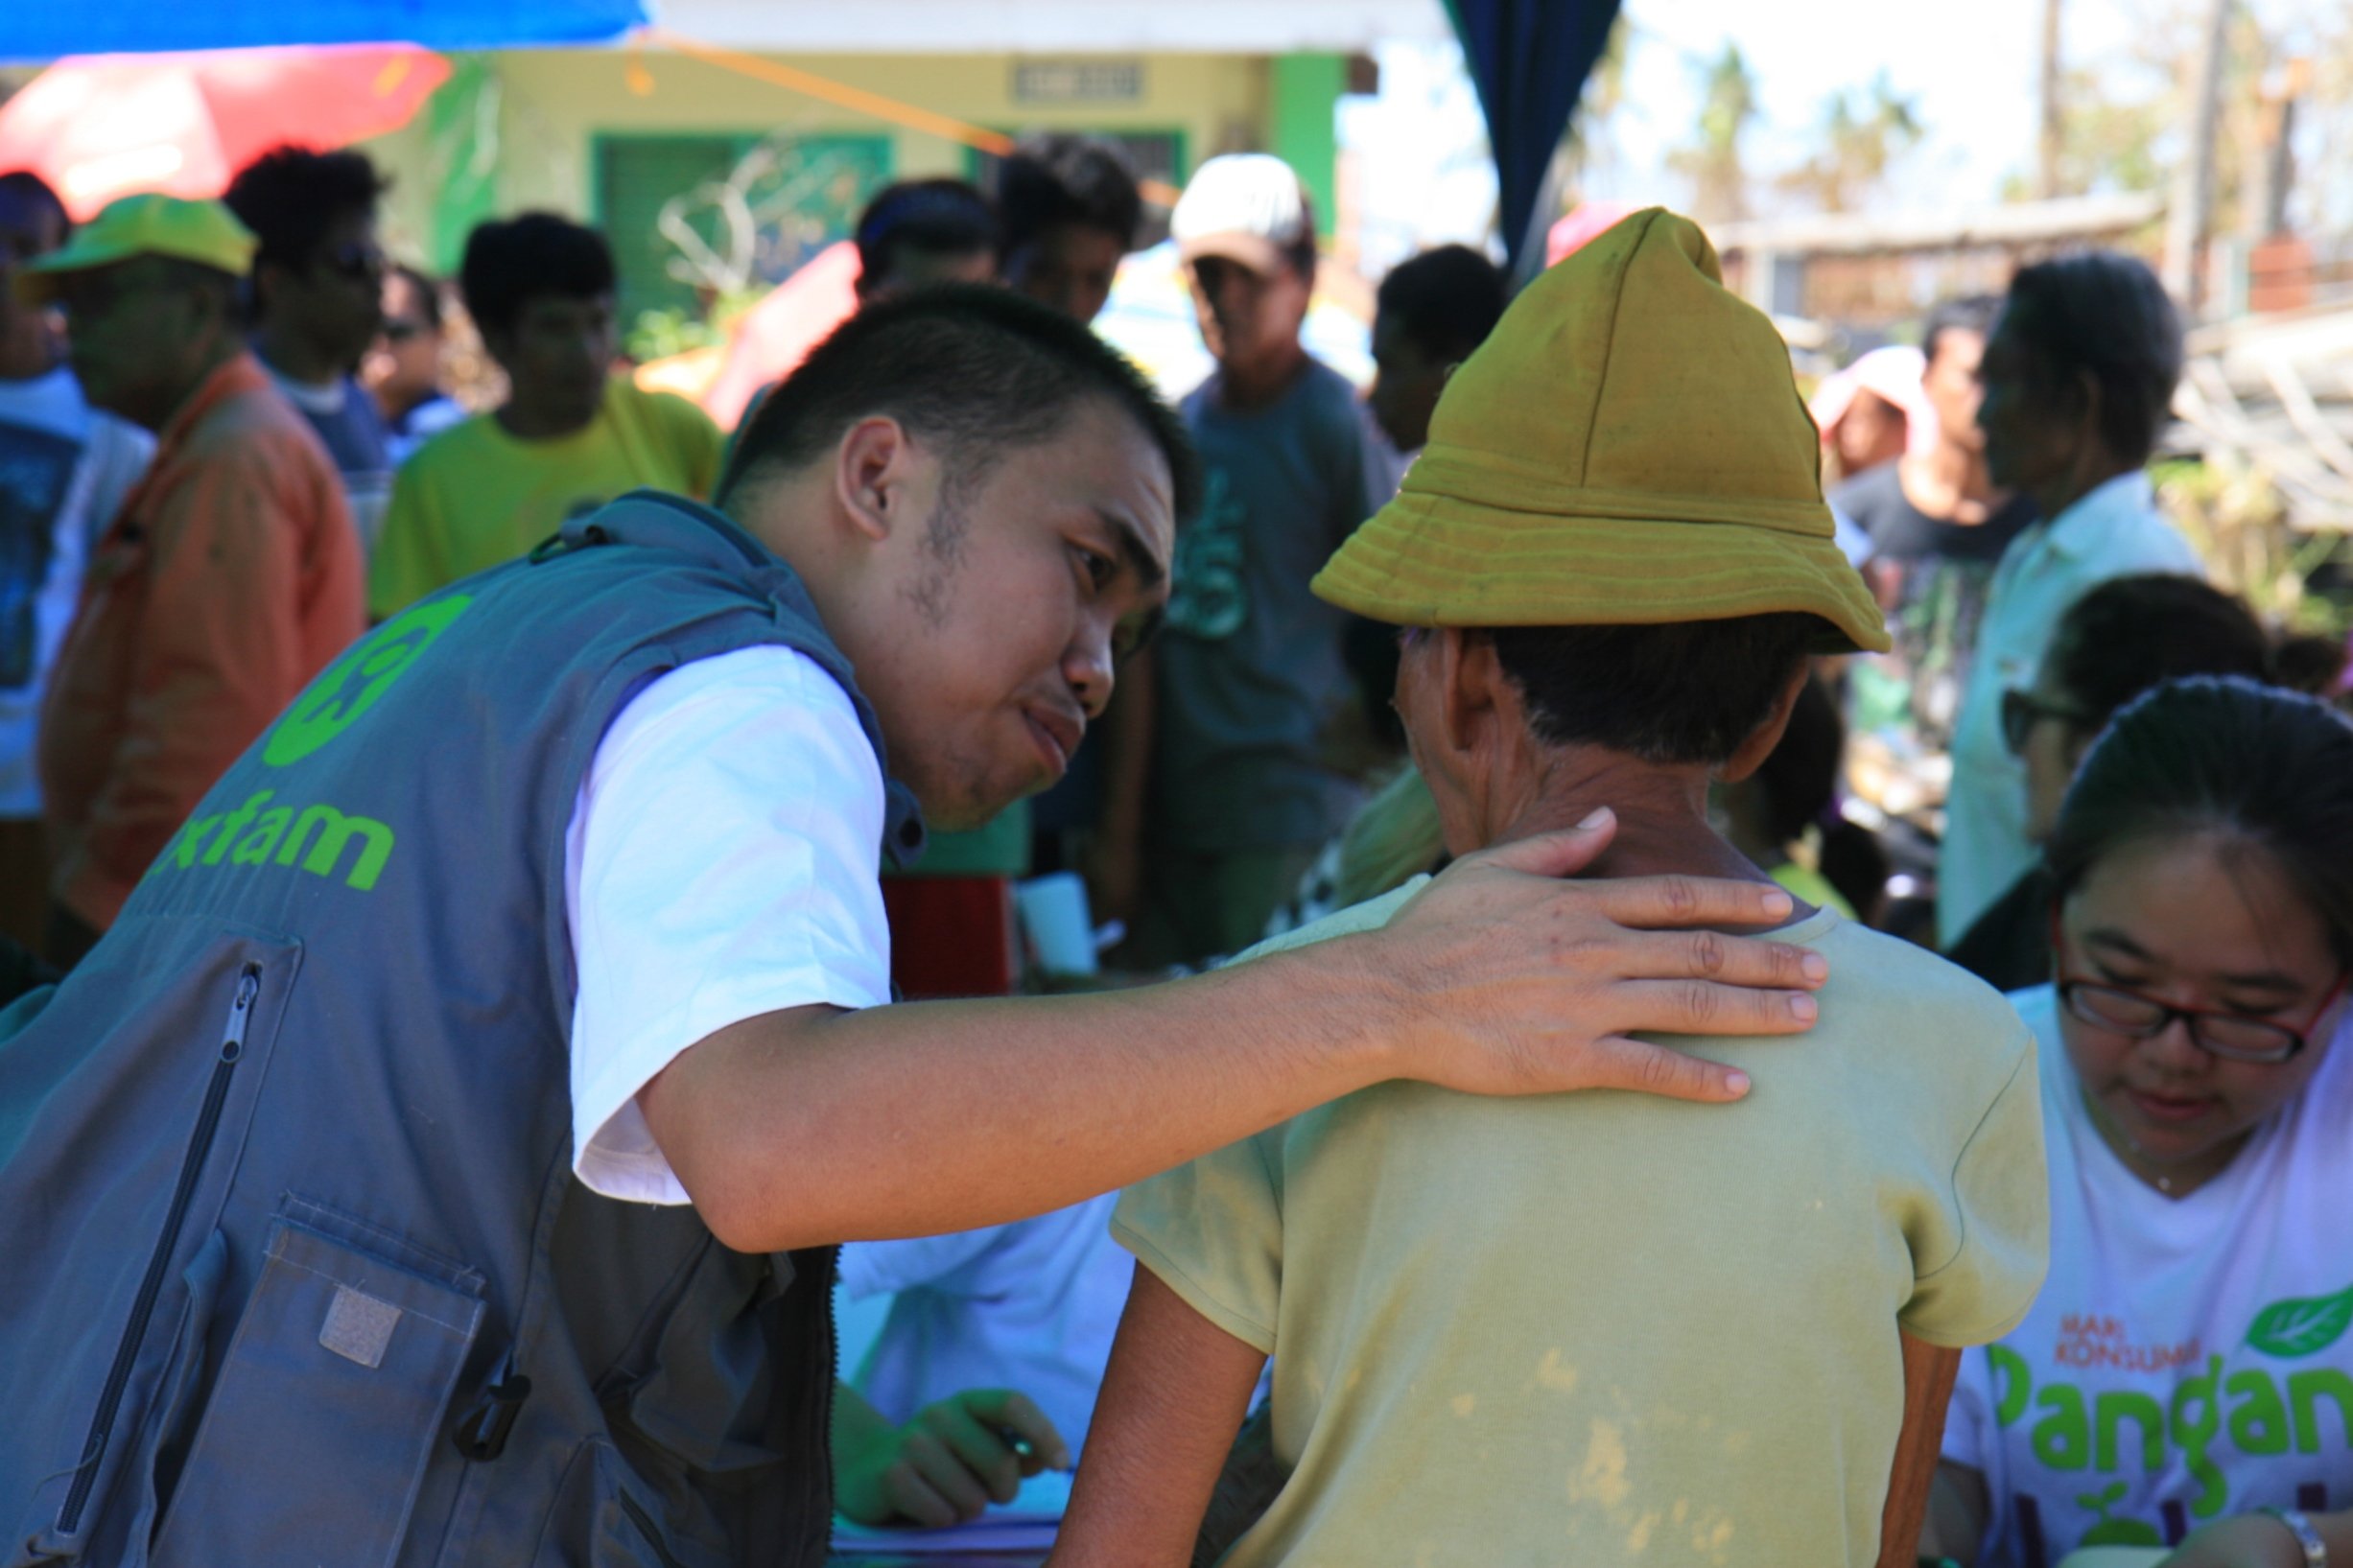 Oxfam staff offering support and reassurance to recipients during the distribution of hygiene items in northern Cebu in 2013.